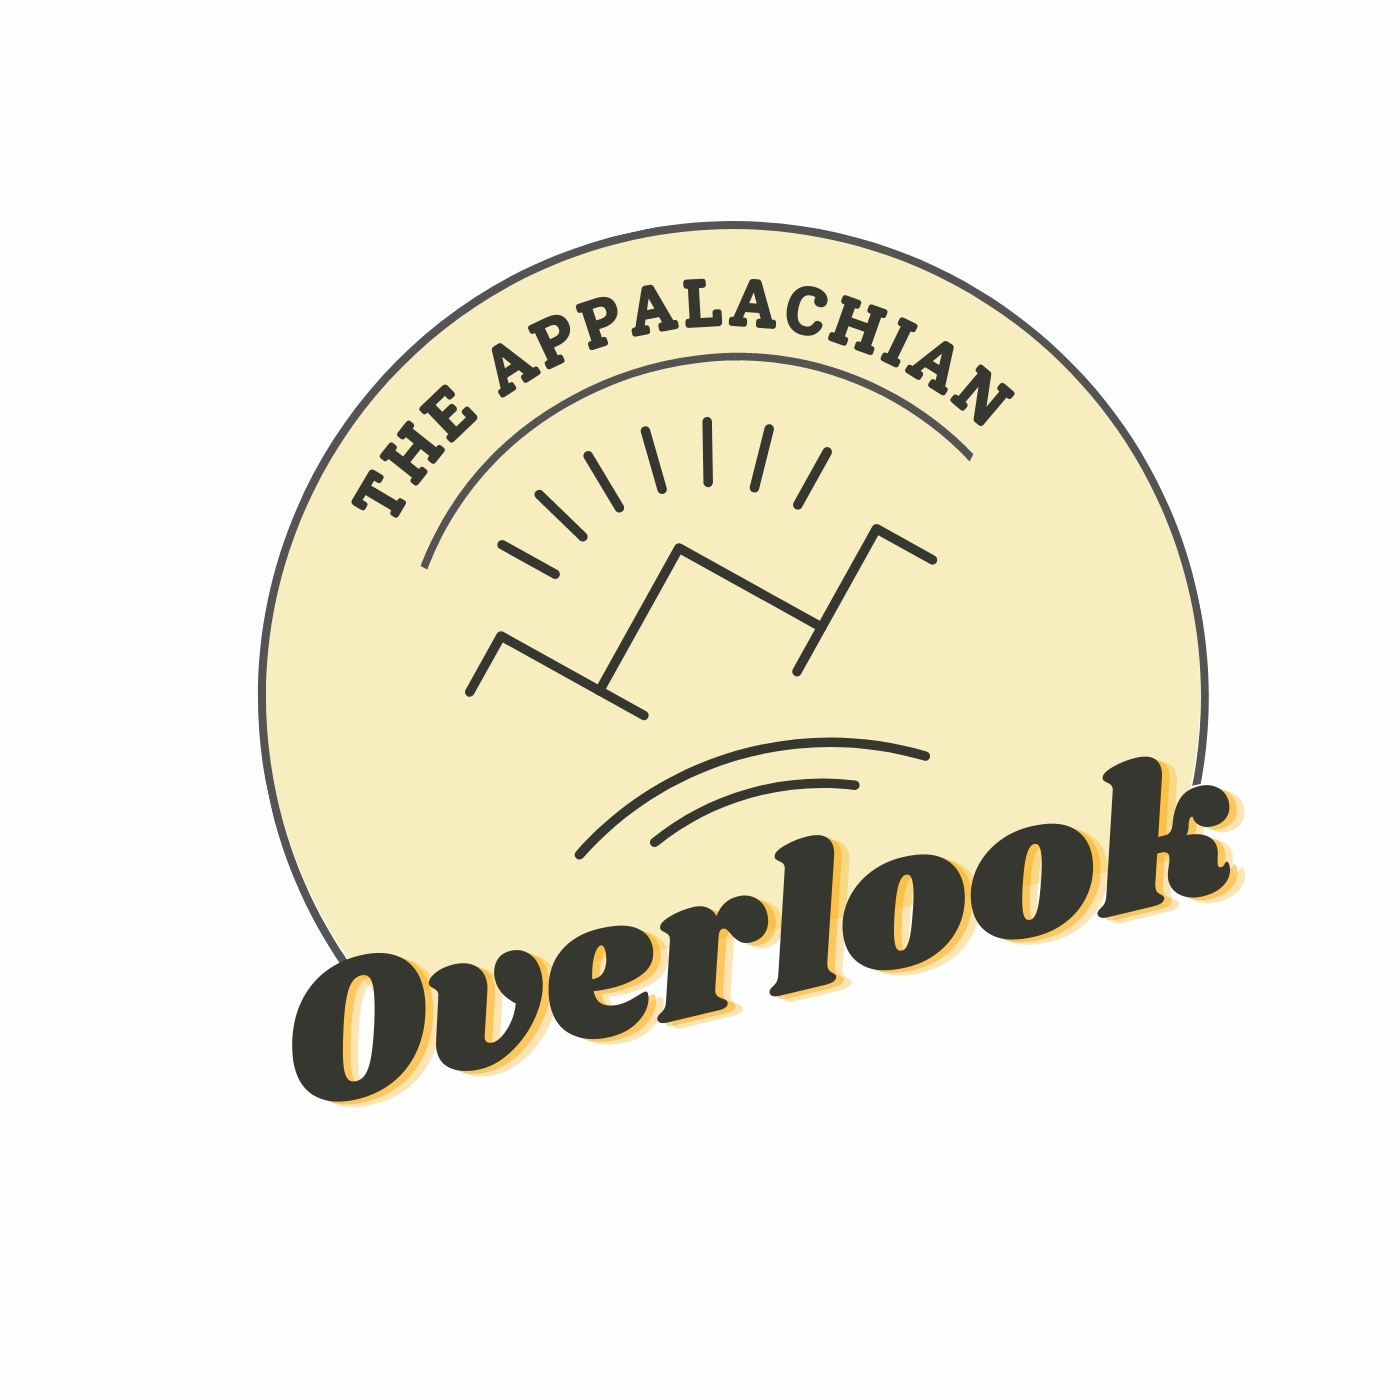 Show artwork for The Appalachian Overlook